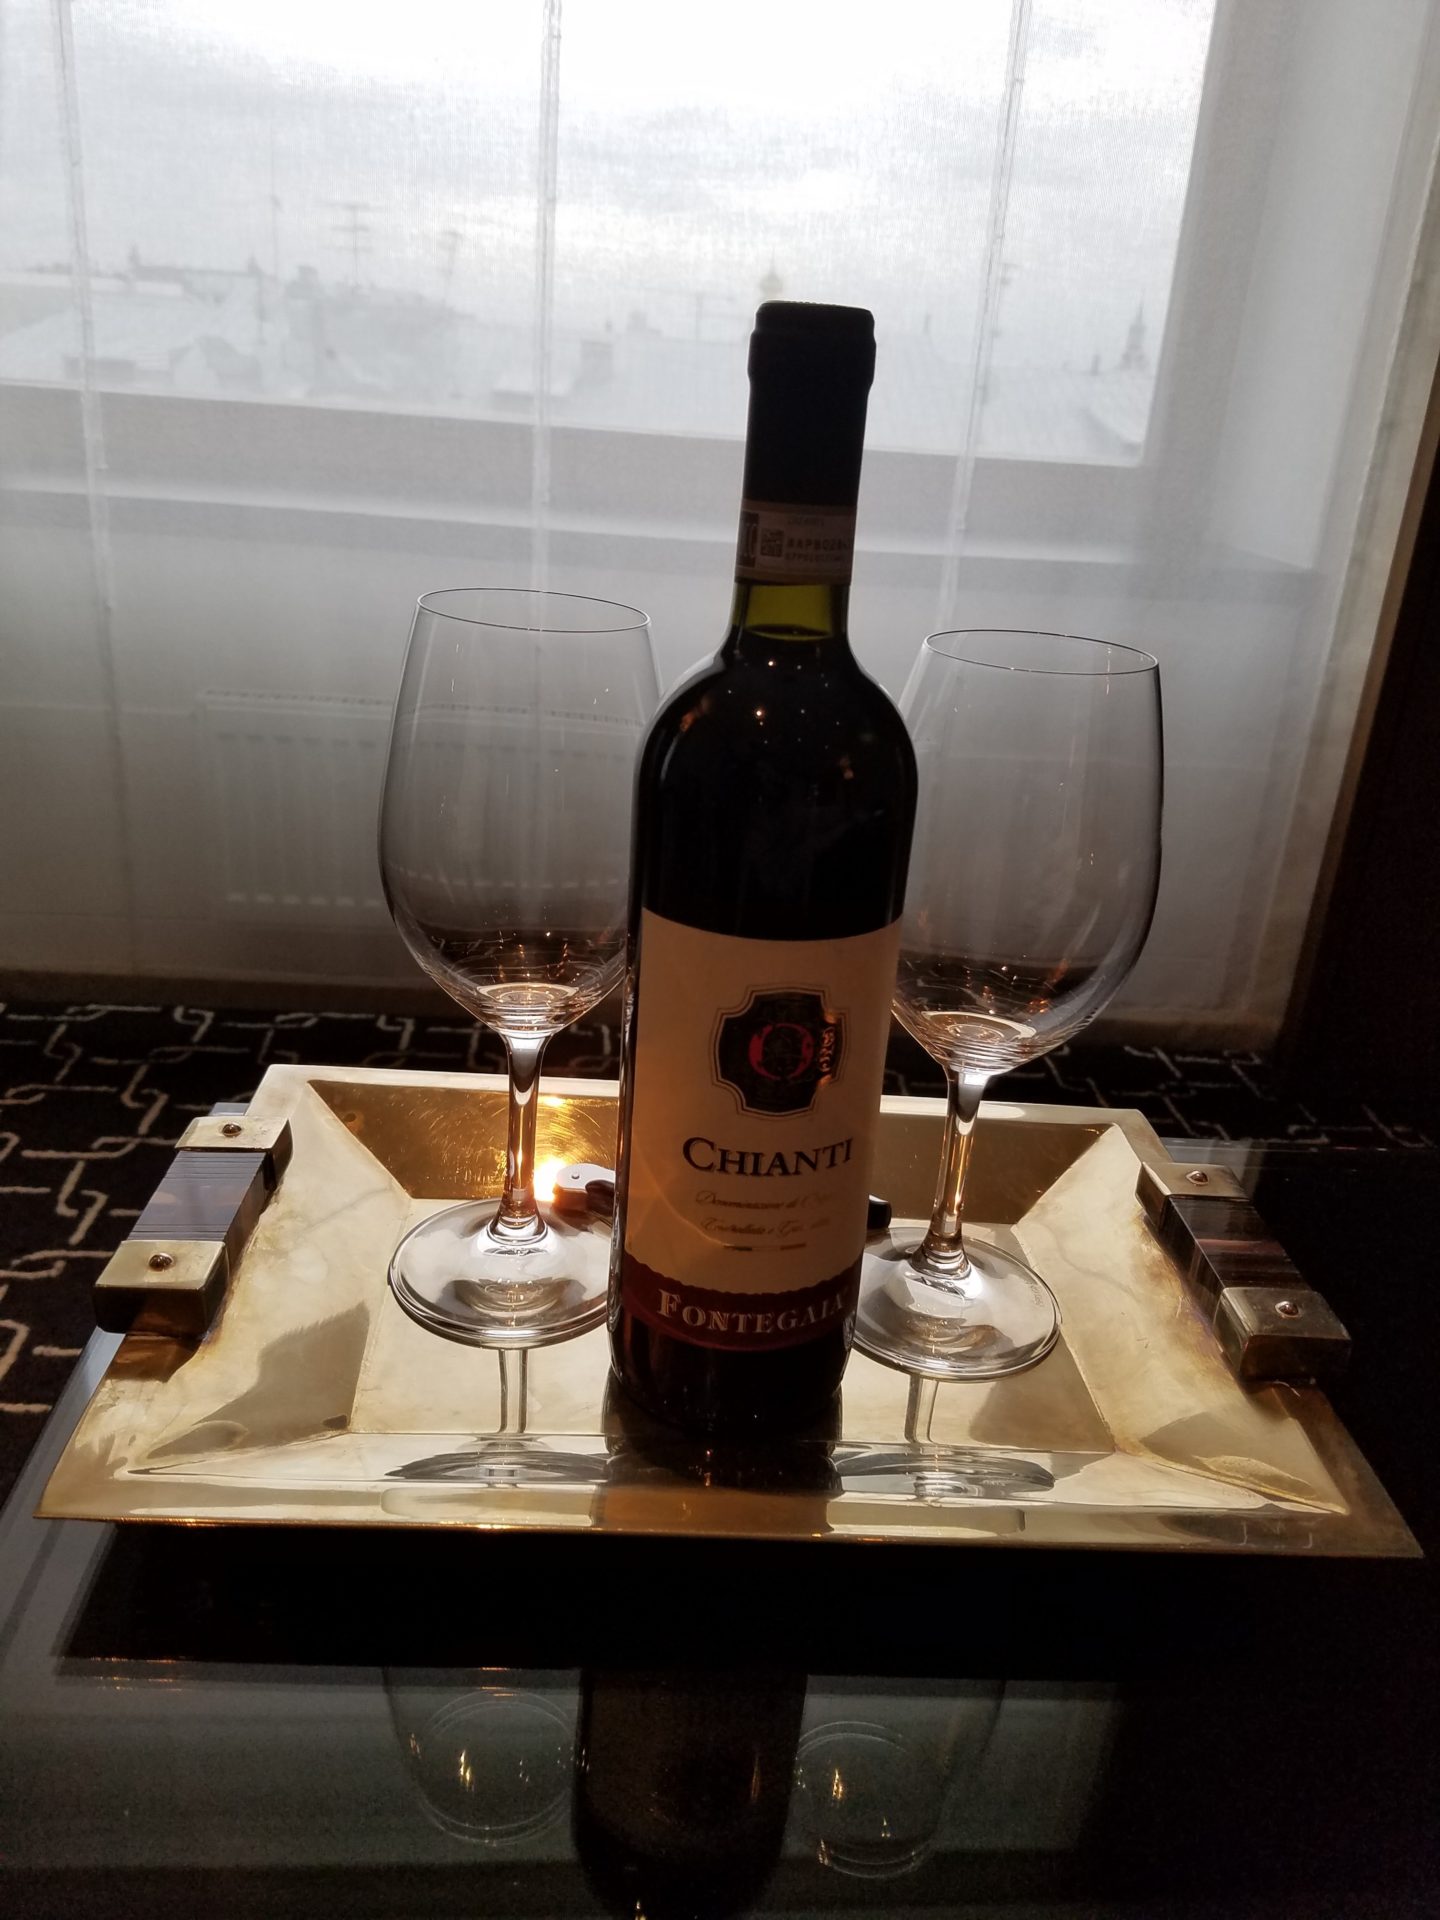 a bottle of wine and two wine glasses on a tray